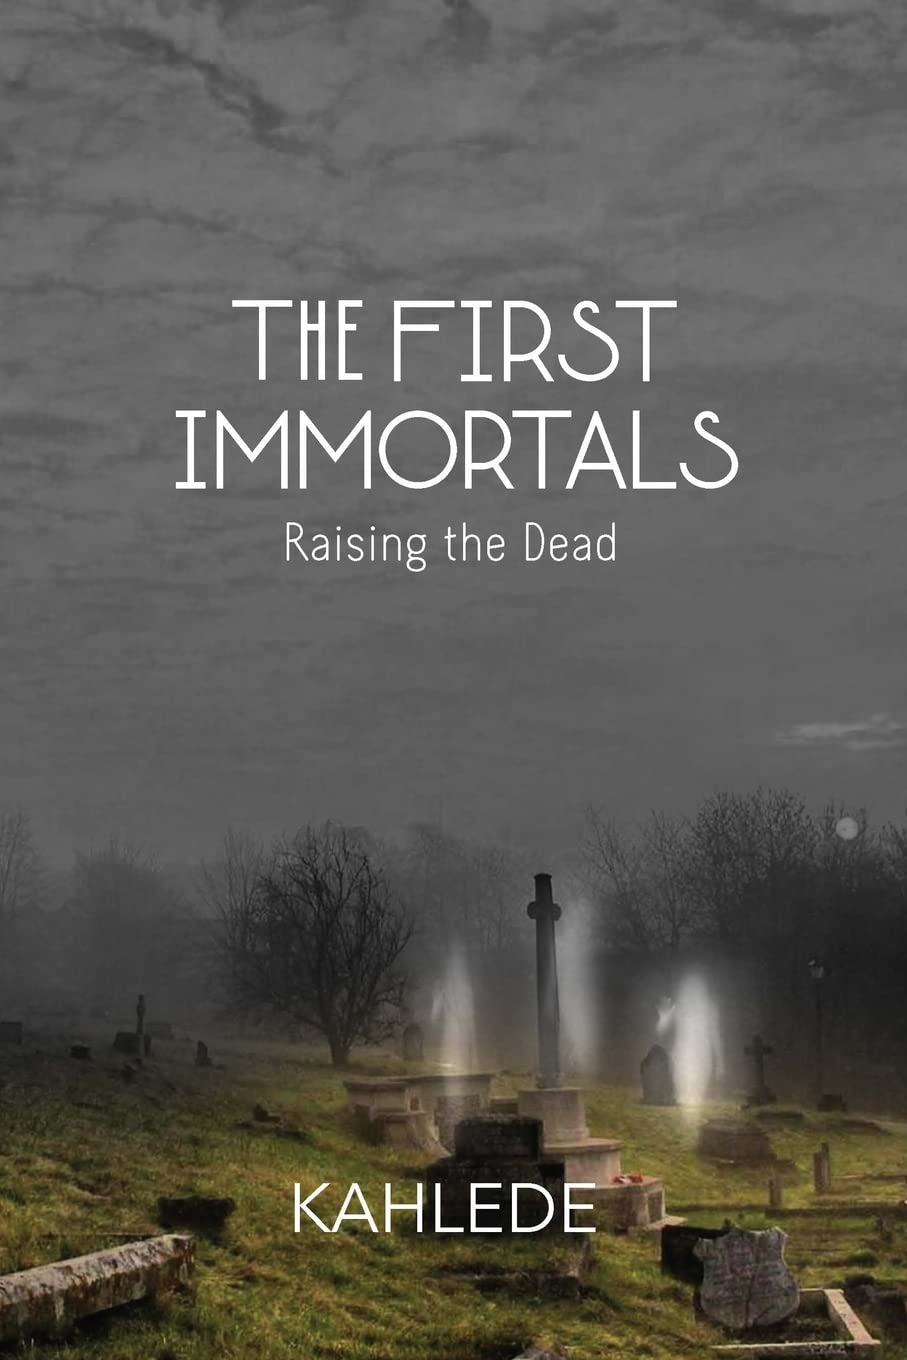 Book - The First Immortals by Kahlede